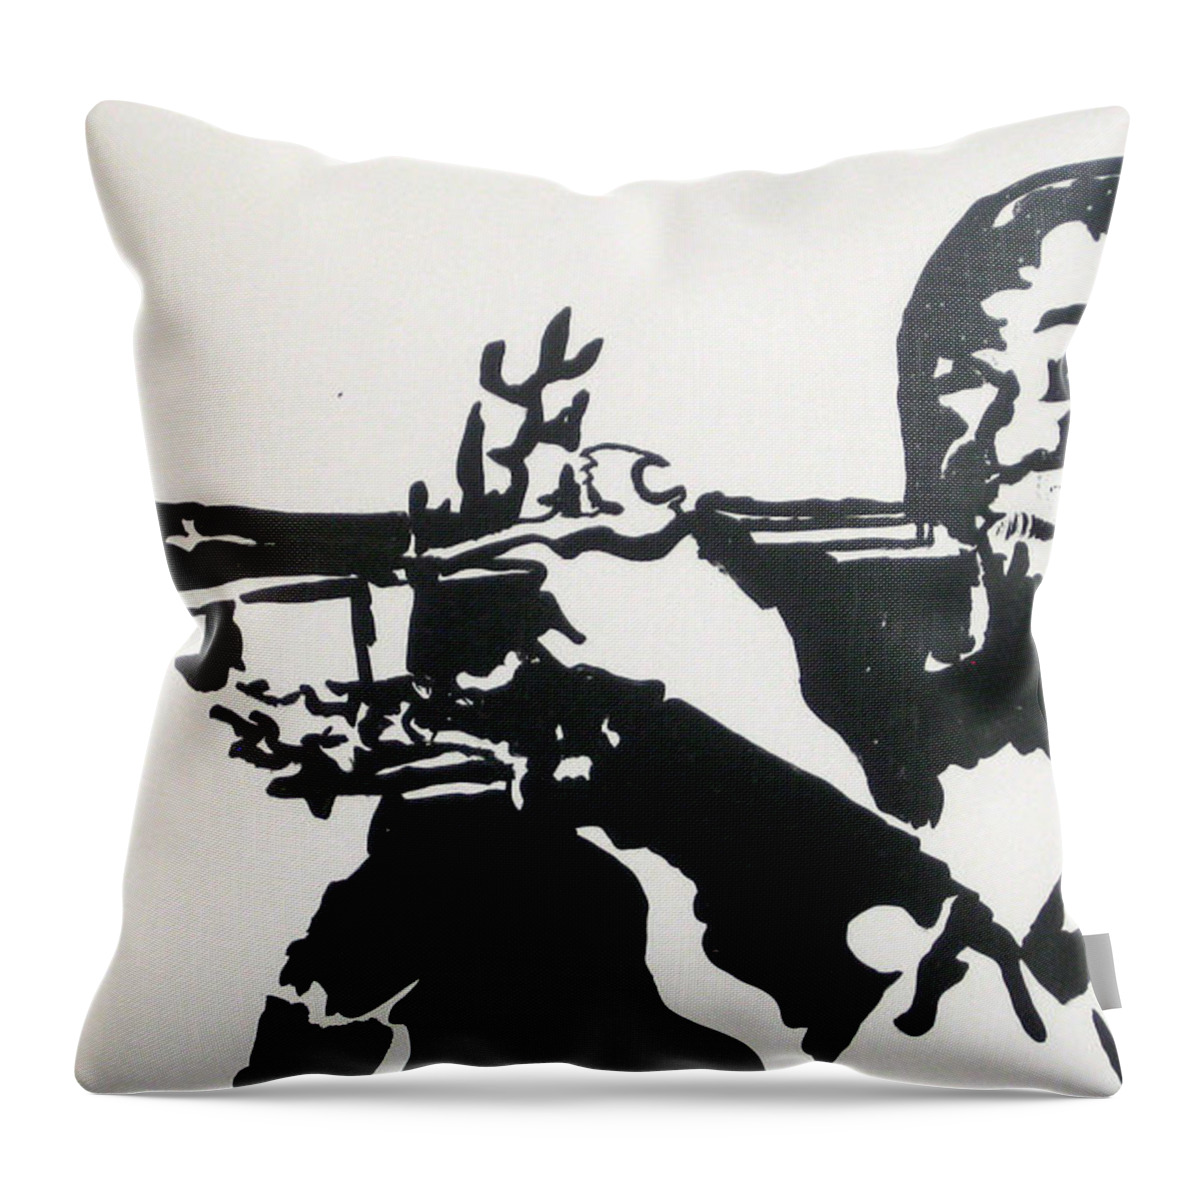 Louie Armstrong Throw Pillow featuring the drawing Armstrong Feeling Happy by Robert Margetts